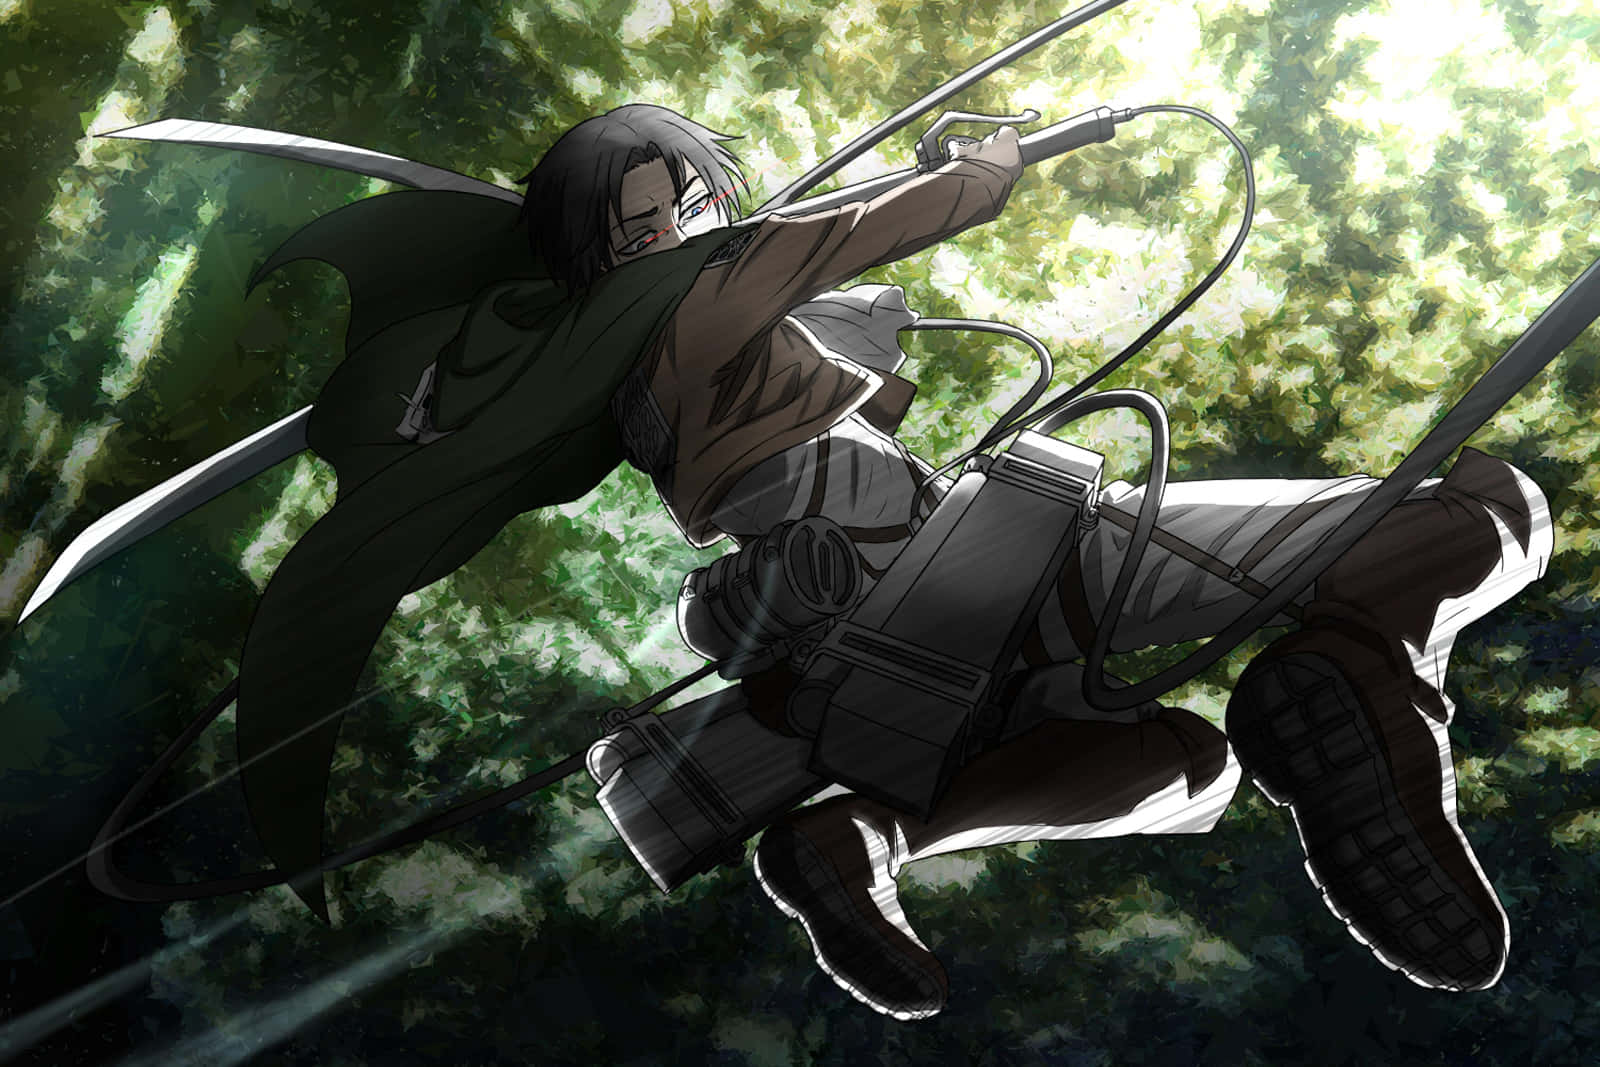 Join the fight against the titans with Eren Yeager and the Survey Corps